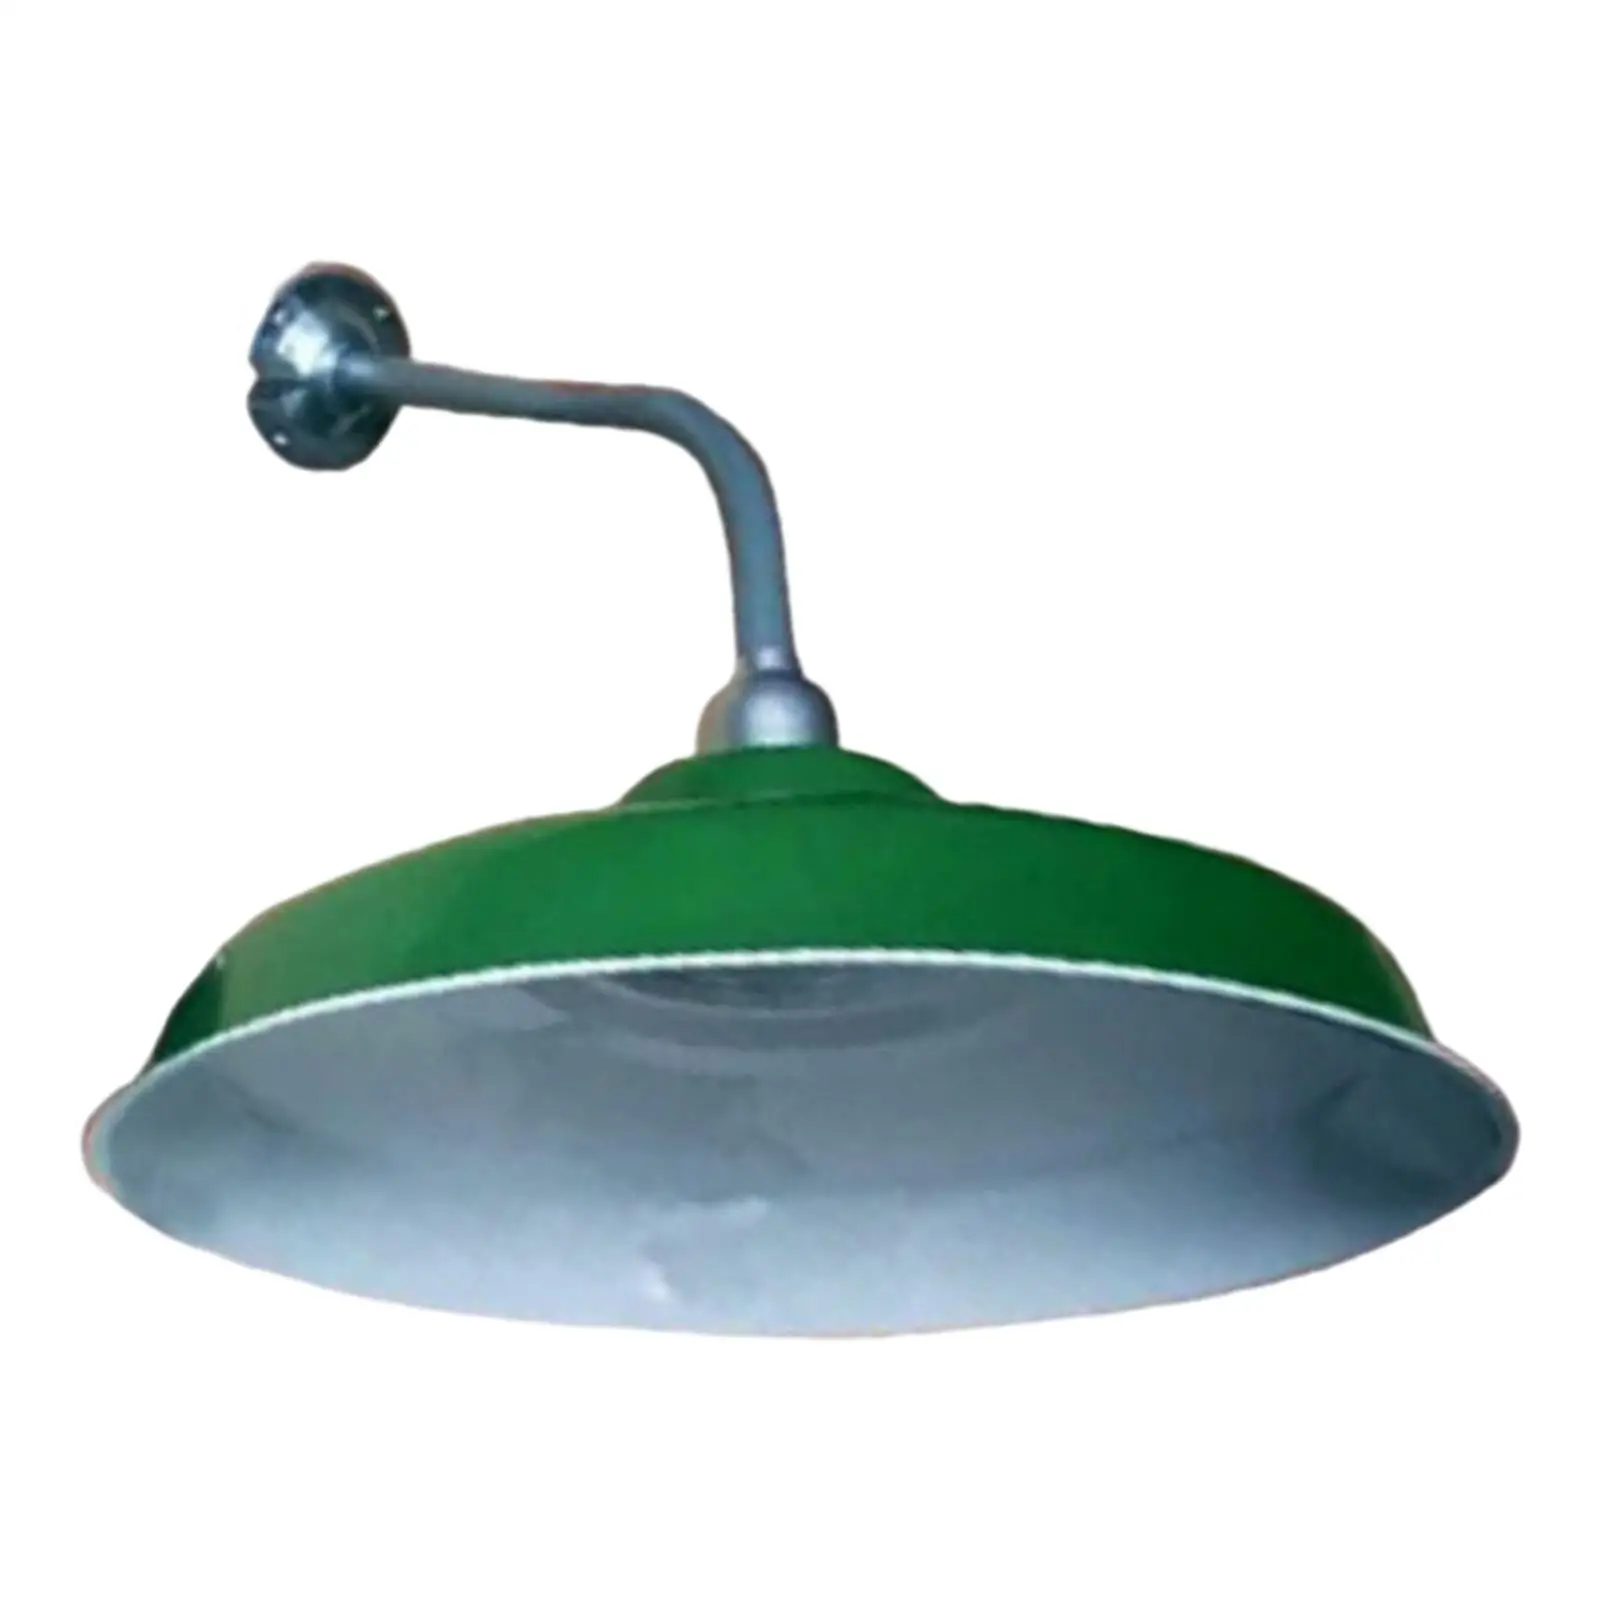 enamel Dome Lamp Shade Holder Green Replacement Accessories Dust Cover Sturdy